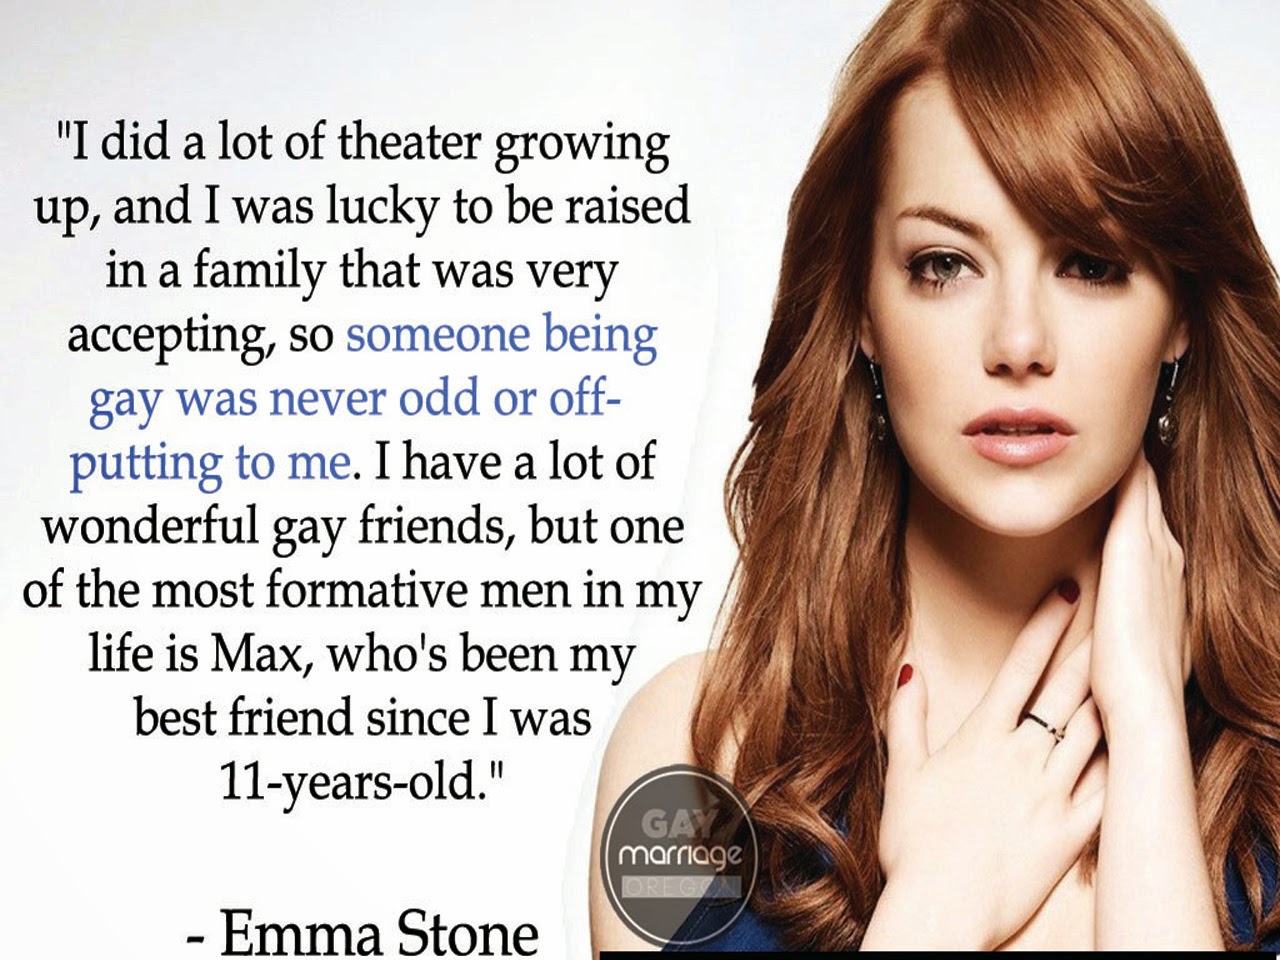 "I did a lot of theater growing up and I was lucky to be